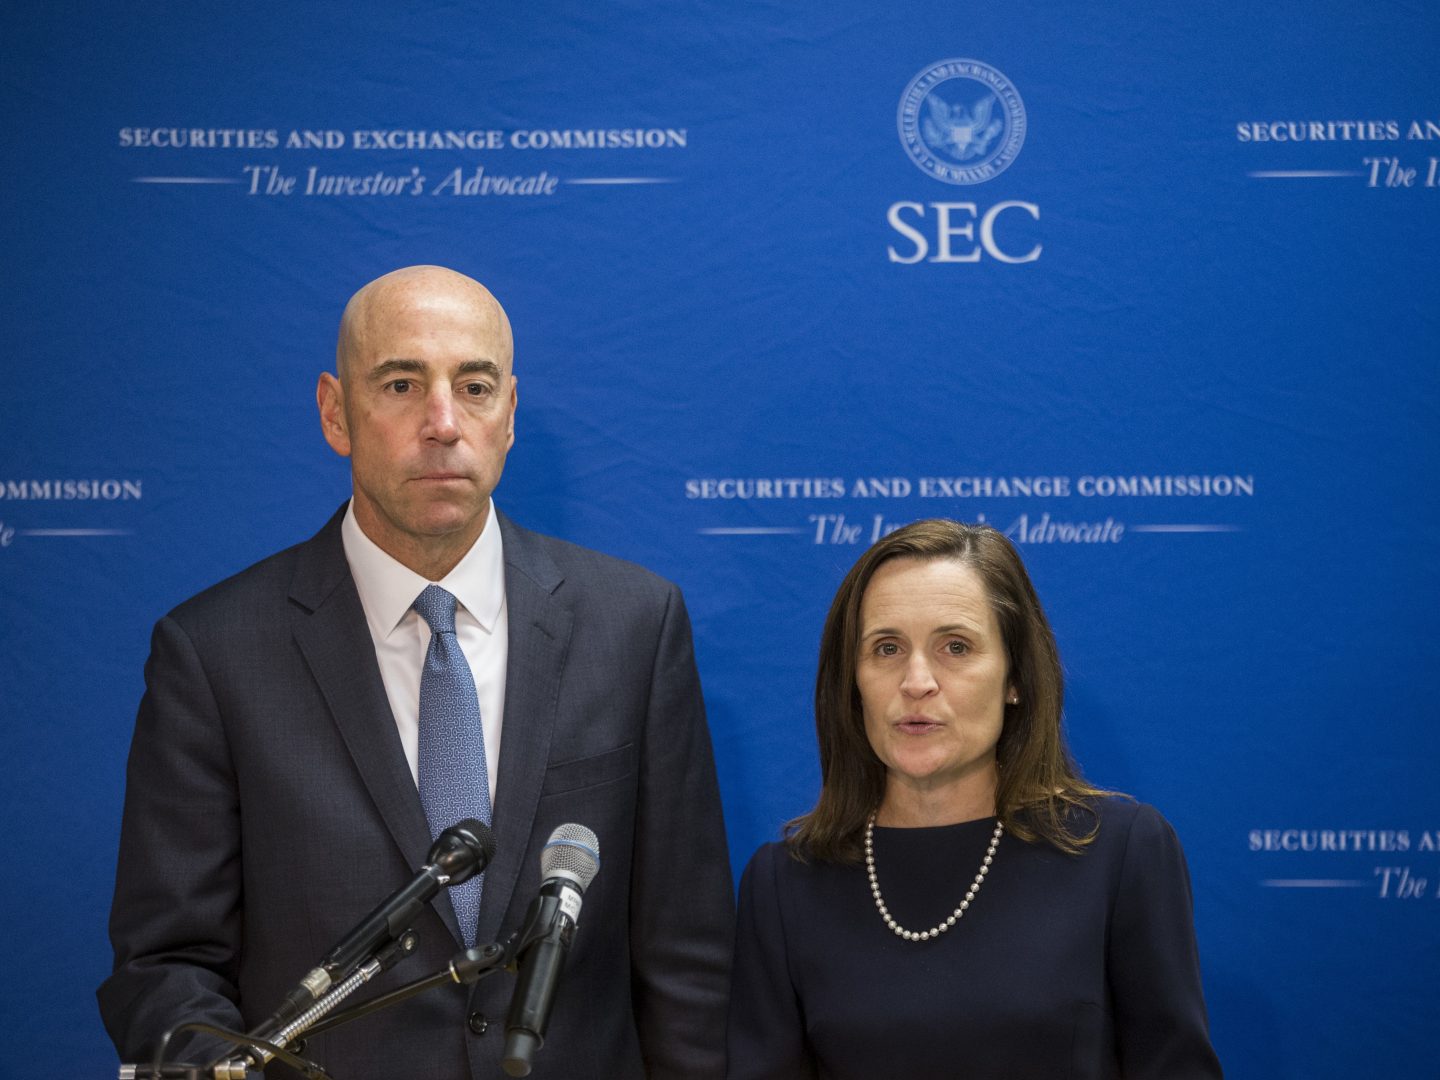 Securities and Exchange Commission Co-Directors of Enforcement Stephanie Avakian and Steven Peikin speak during a news conference in 2018. Avakian and Peikin say their office is aggressively pursuing enforcement related to the coronavirus pandemic.